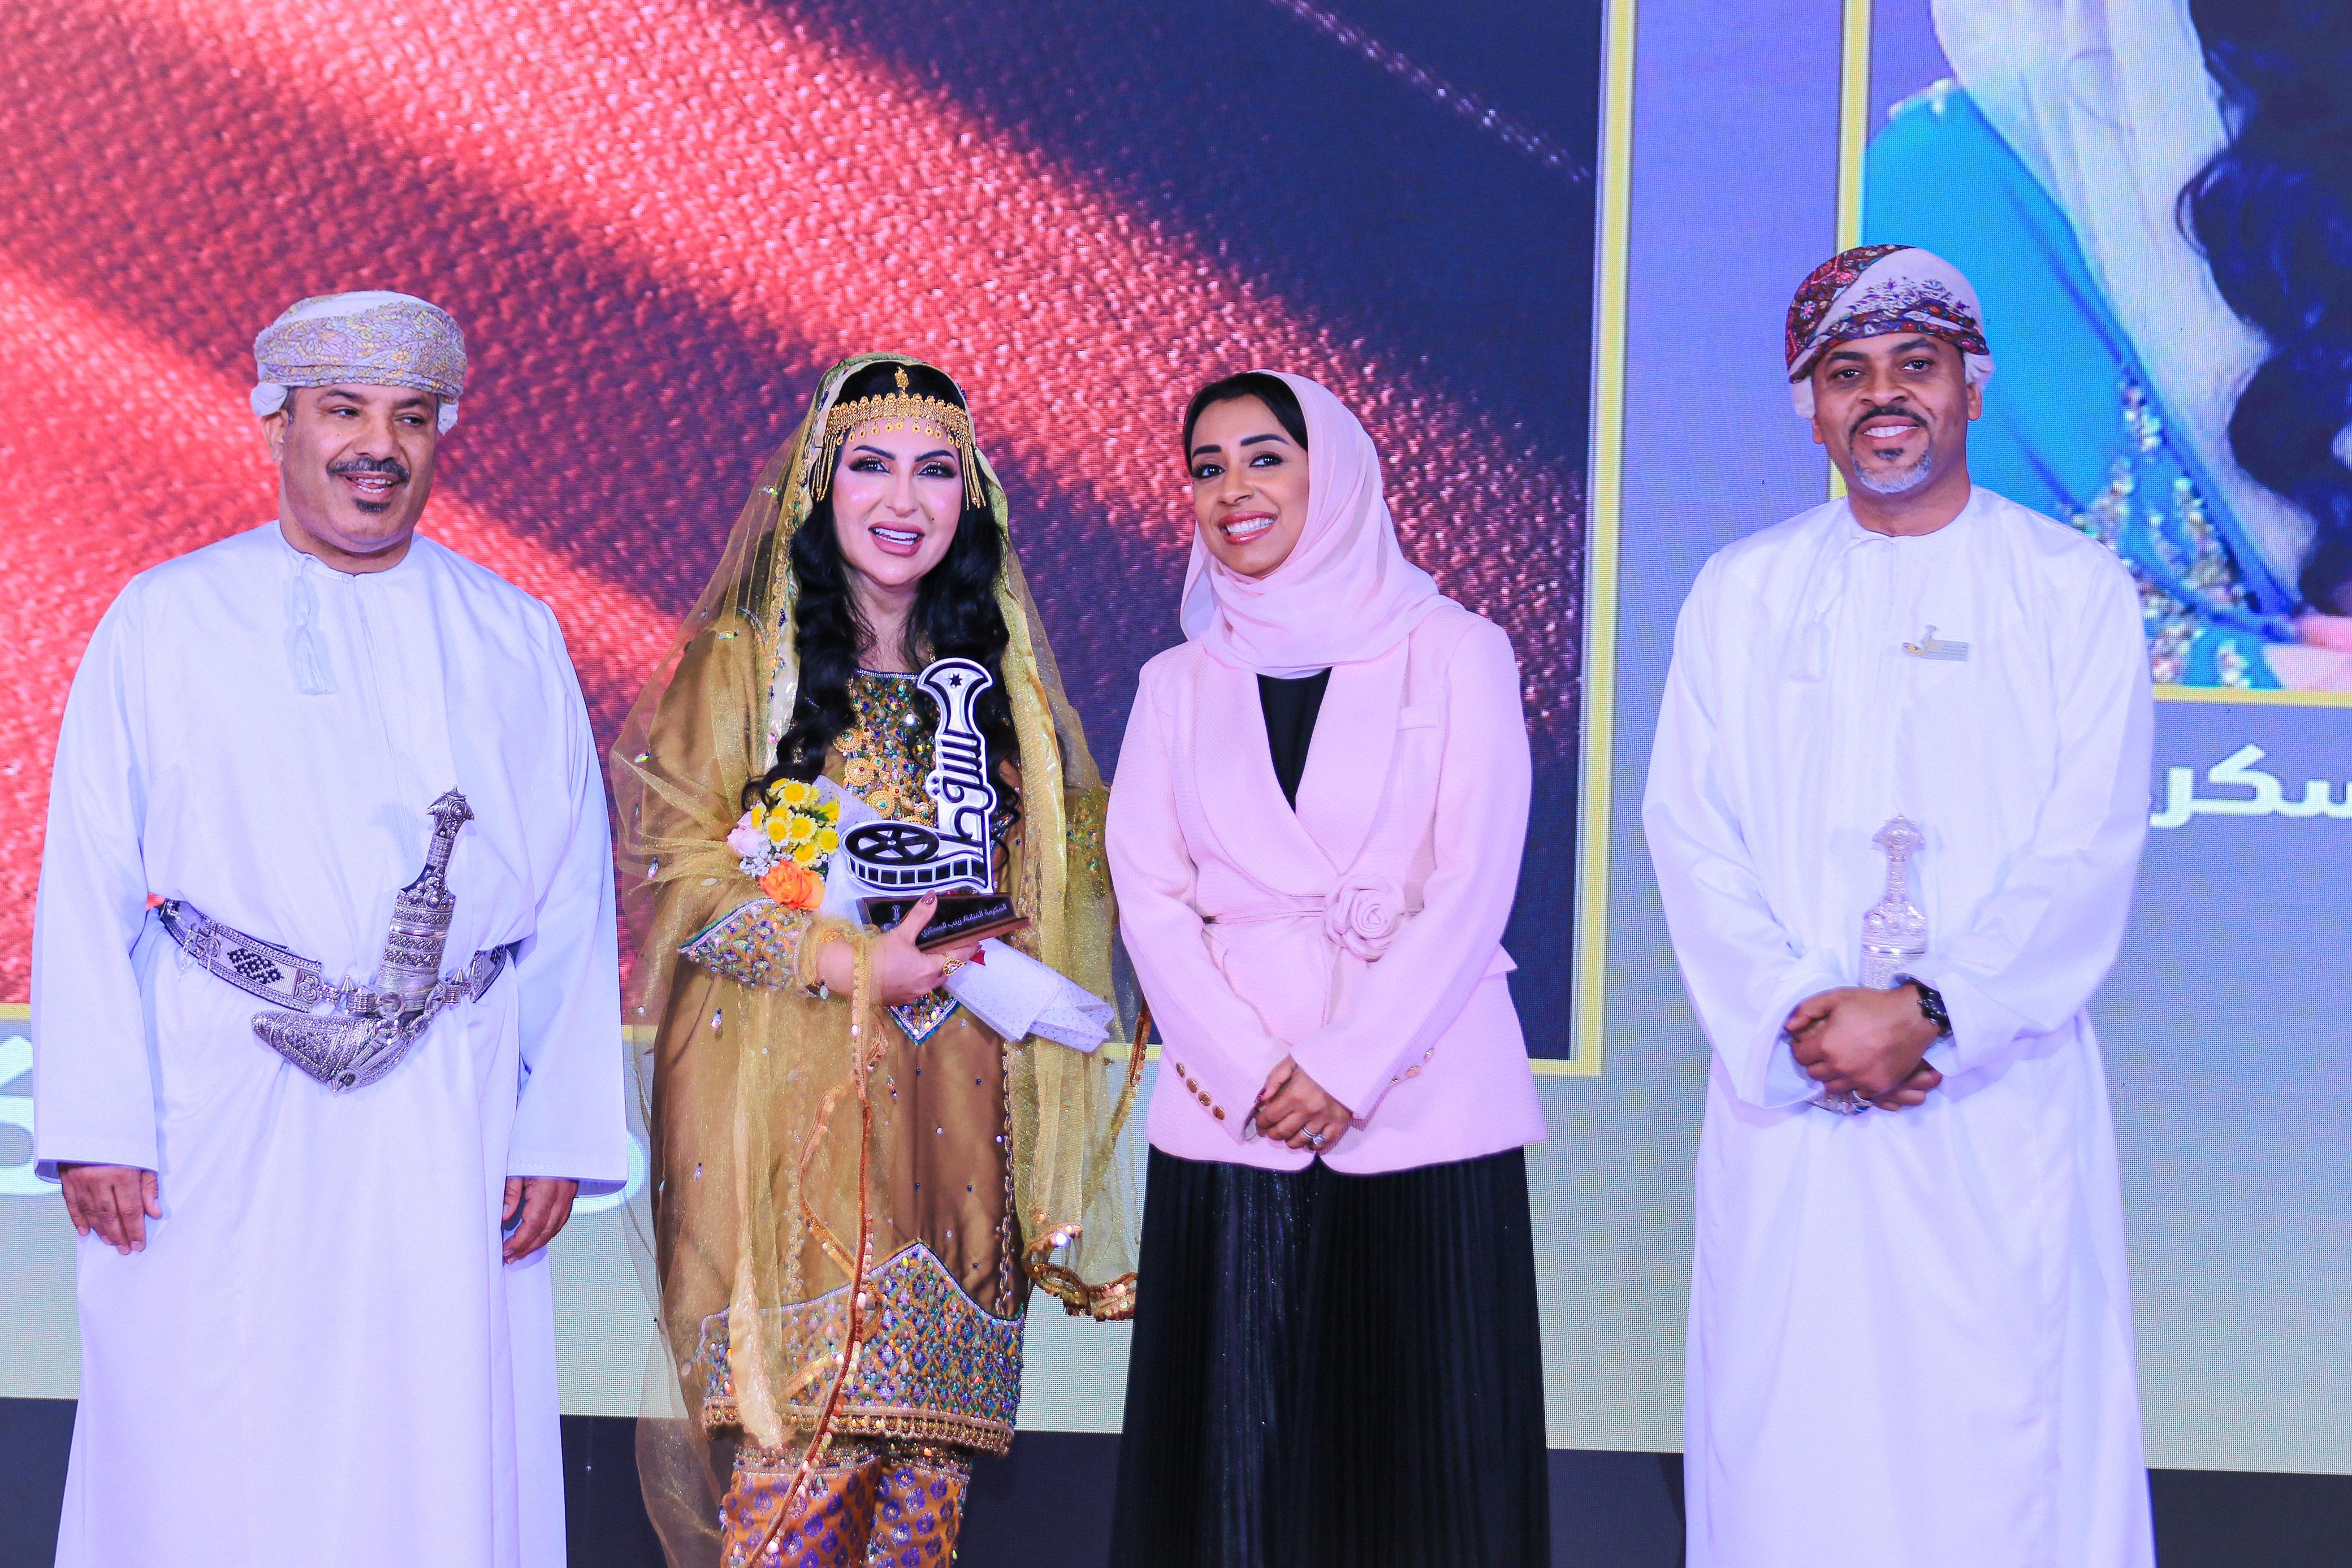 Muscat International Film Festival Shines with 20 Cinematic Awards: Al-Amiri Emphasizes Focus on National Identity and Cultural Development